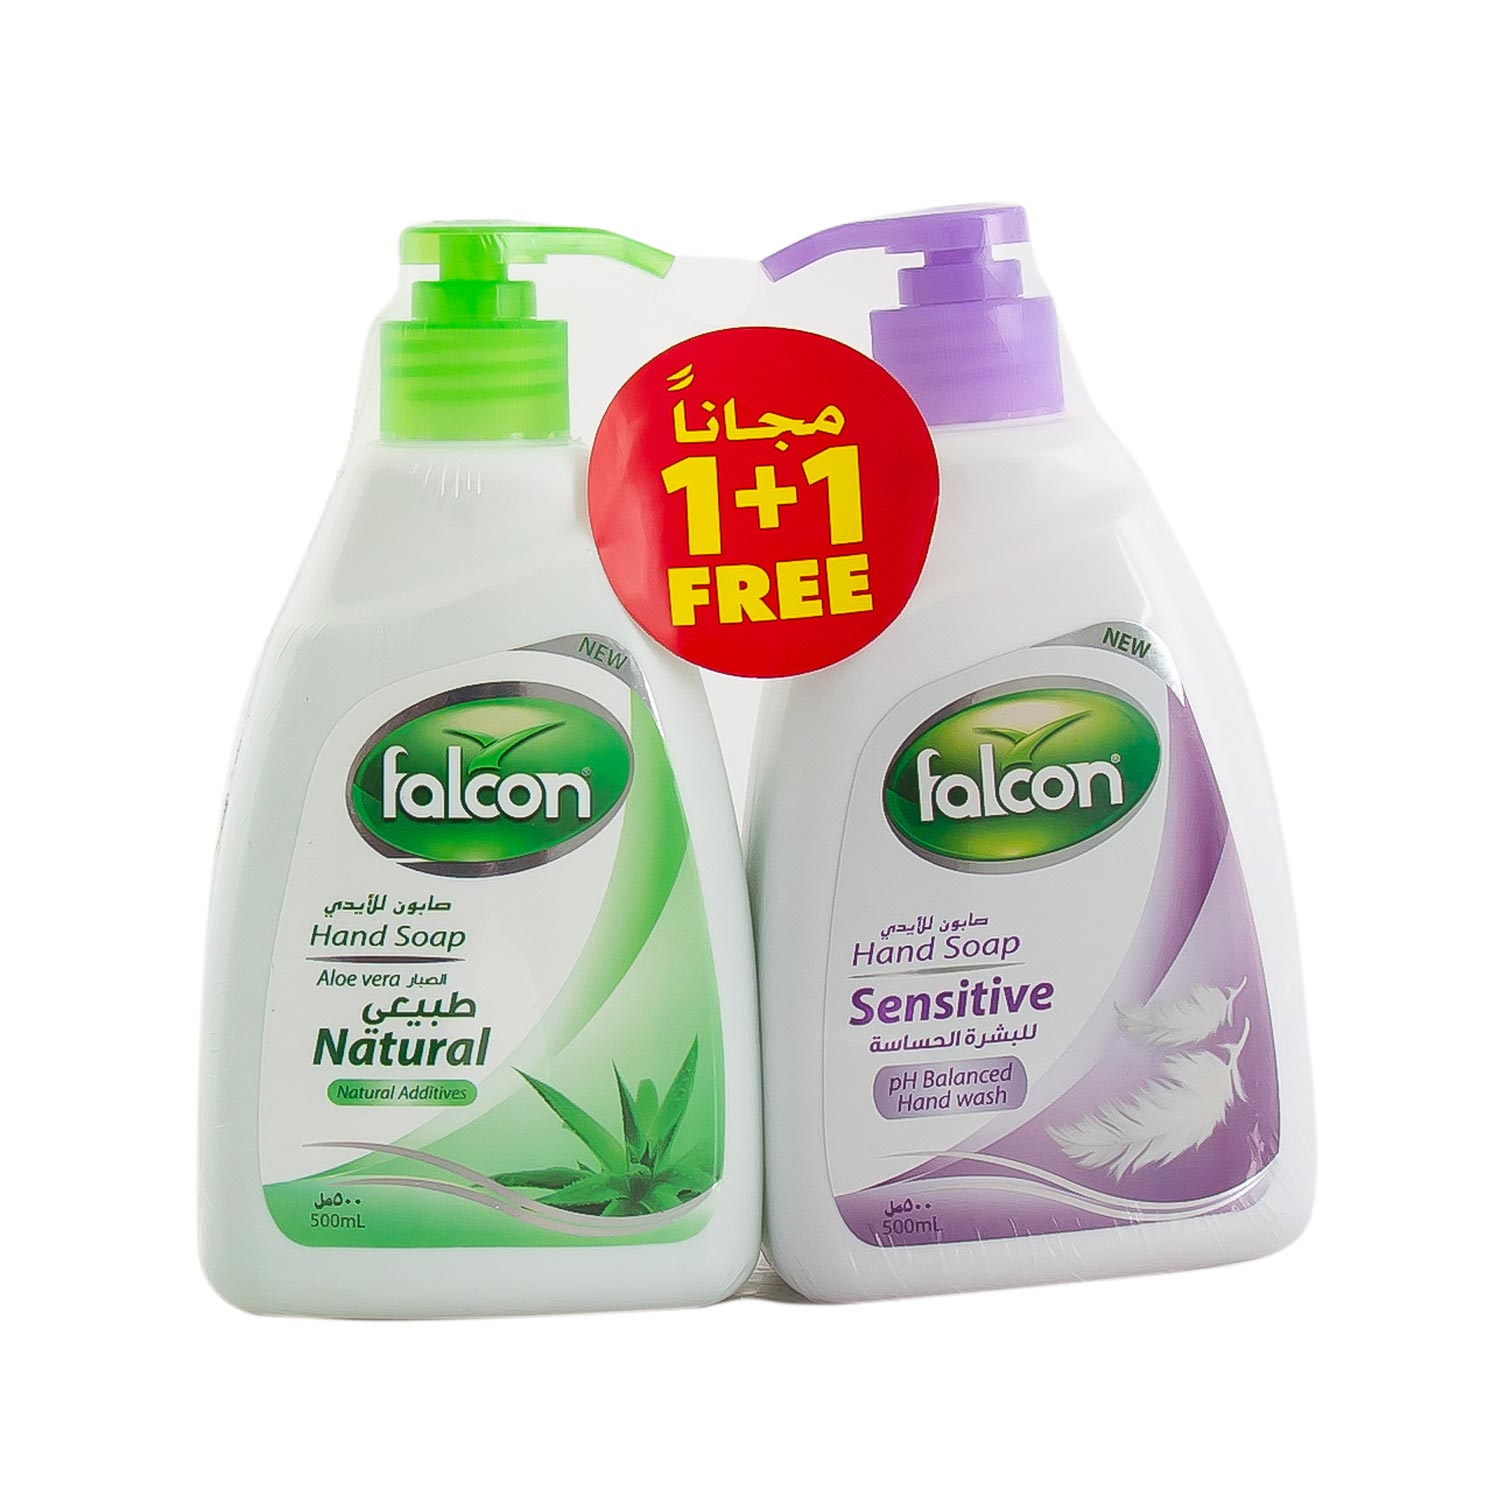 Falcon Natural Hand Soap Liquid (Pack of 2 Bottles)